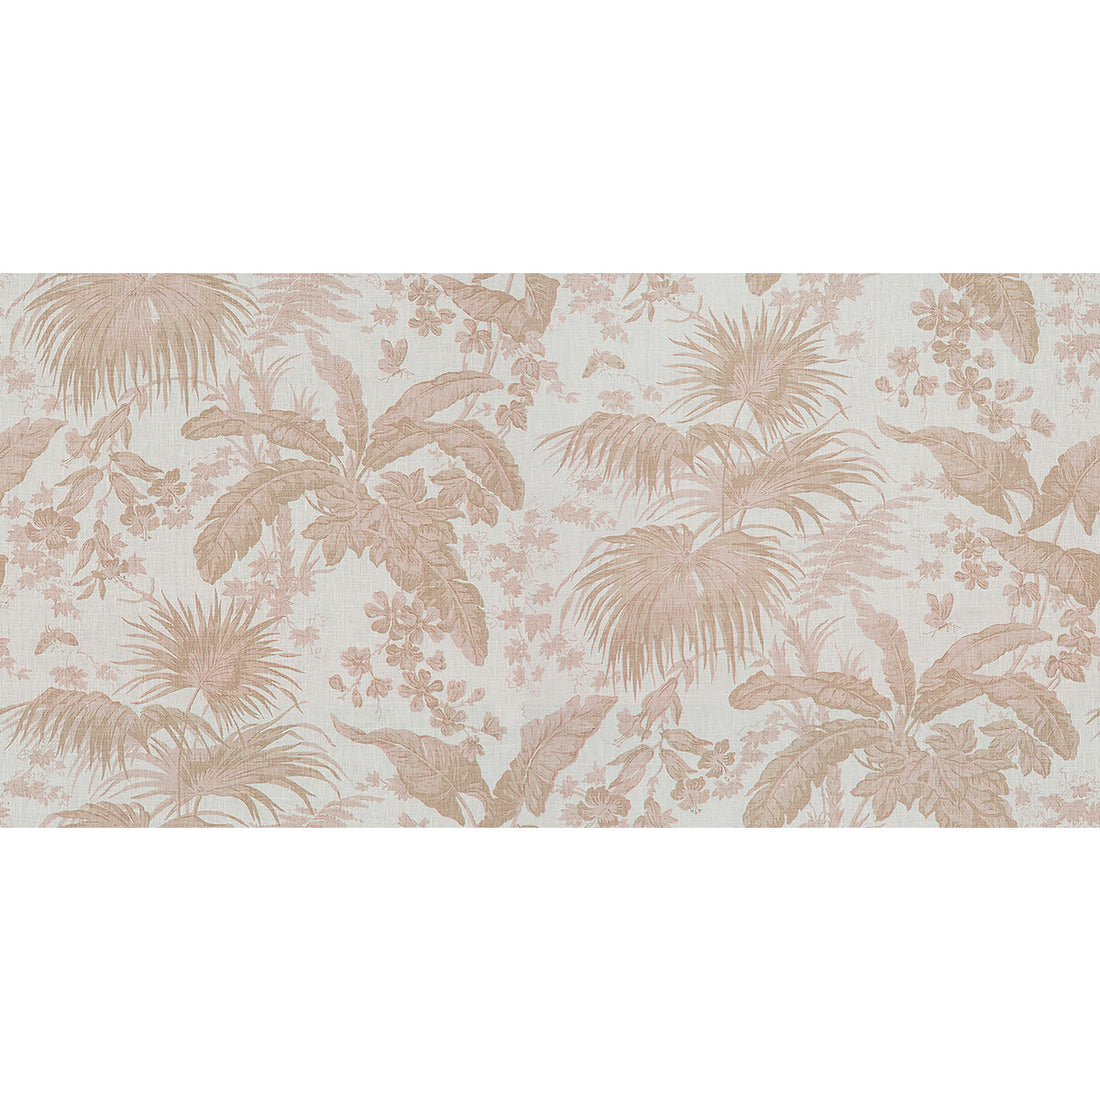 Flamands fabric in petal color - pattern FLAMANDS.716.0 - by Kravet Couture in the Jan Showers Glamorous collection